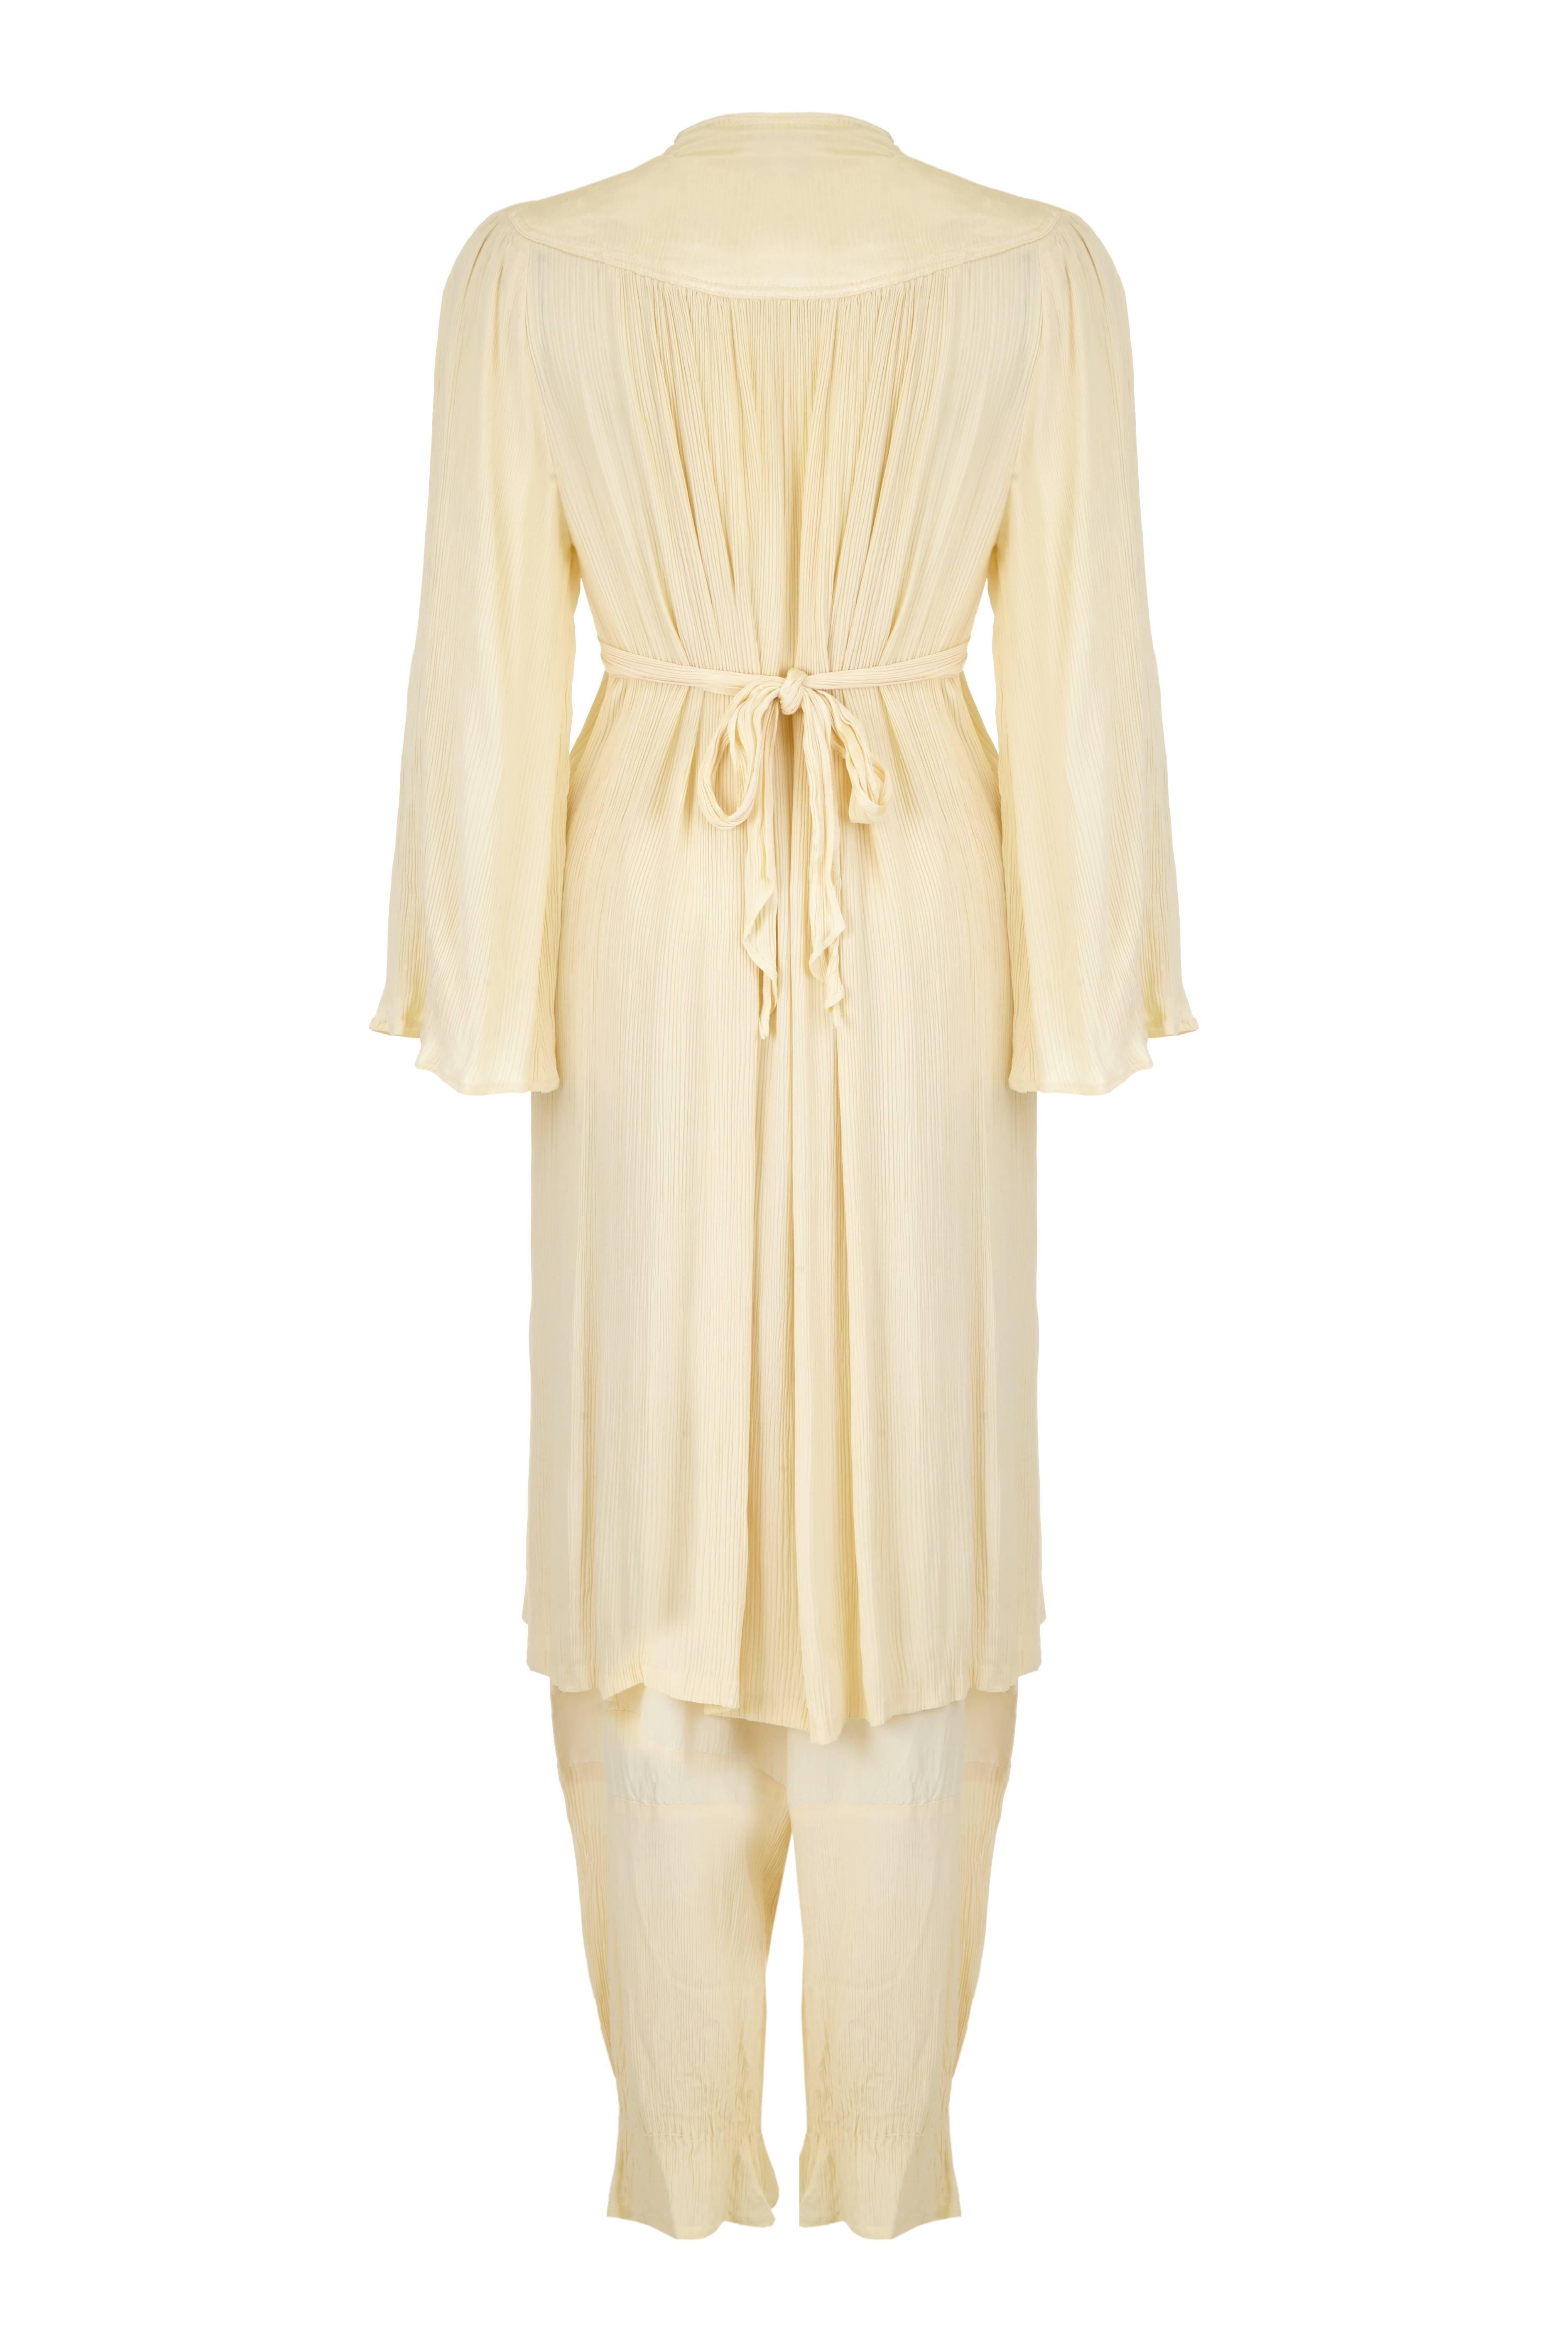 Lovely vintage 1970s Ossie Clark for Radley cream pleated tunic and trouser set.  This easy to wear, relaxed suit features a yoke at the back which wraps around to the front to form an panel that extends to bust level where ties are attached to tie